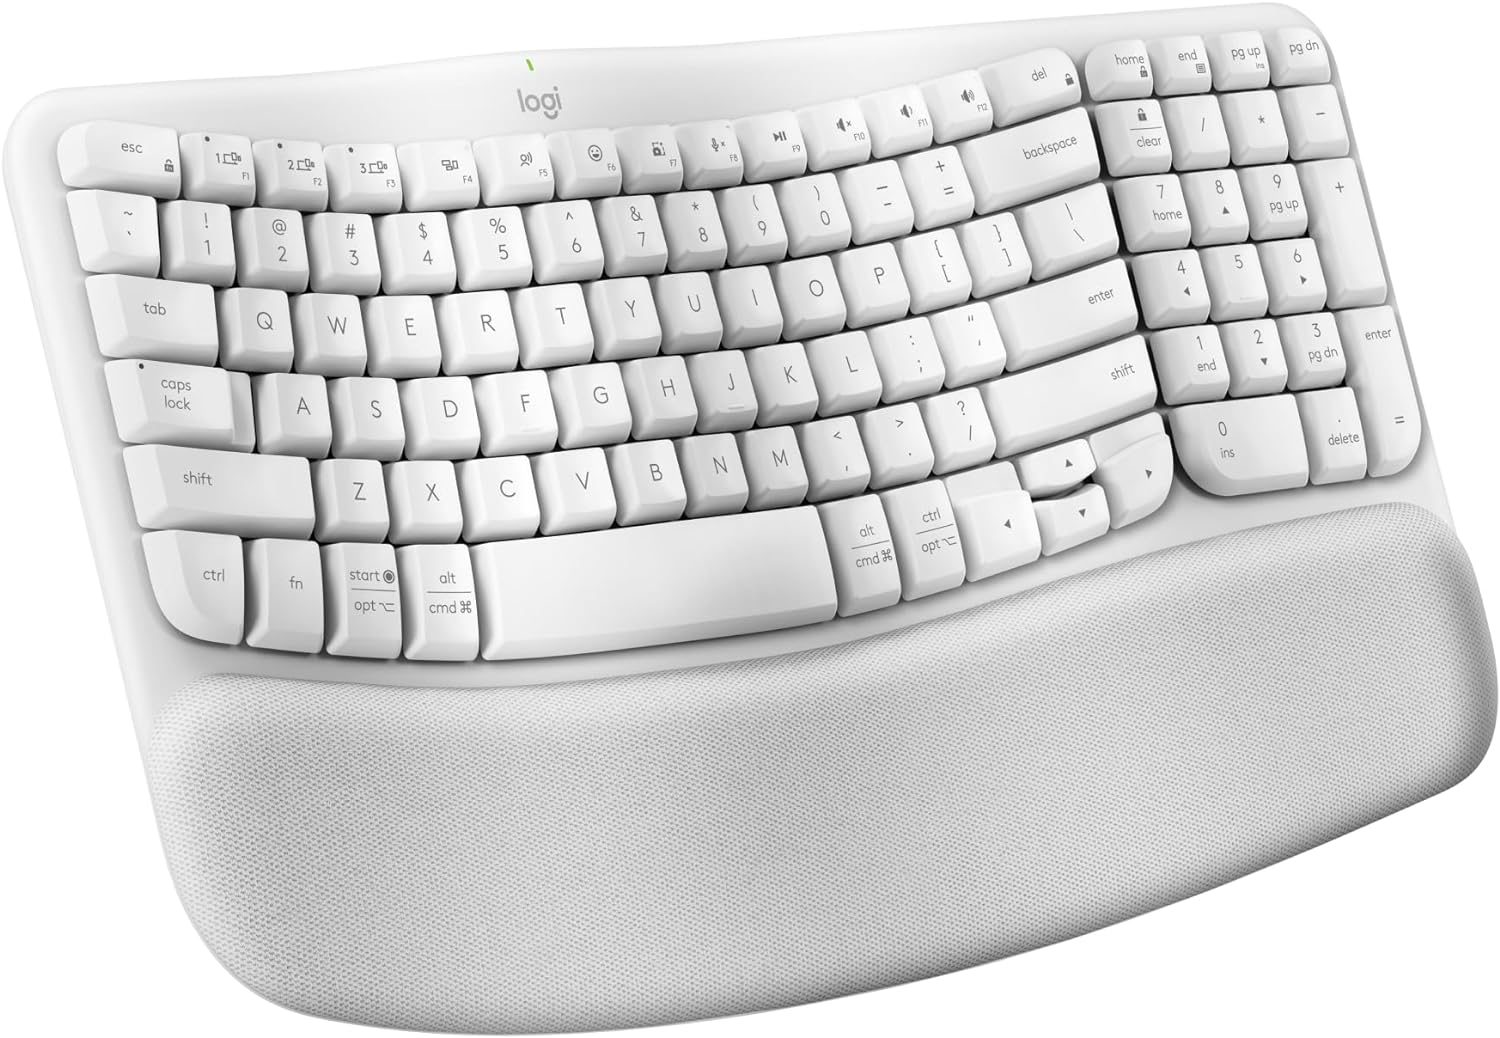 Logitech Wave Keys Wireless Ergonomic Keyboard with Cushioned Palm Rest, Comfortable Natural Typing, Easy-Switch, Bluetooth, Logi Bolt Receiver, for Multi-OS, Windows/Mac - Off White